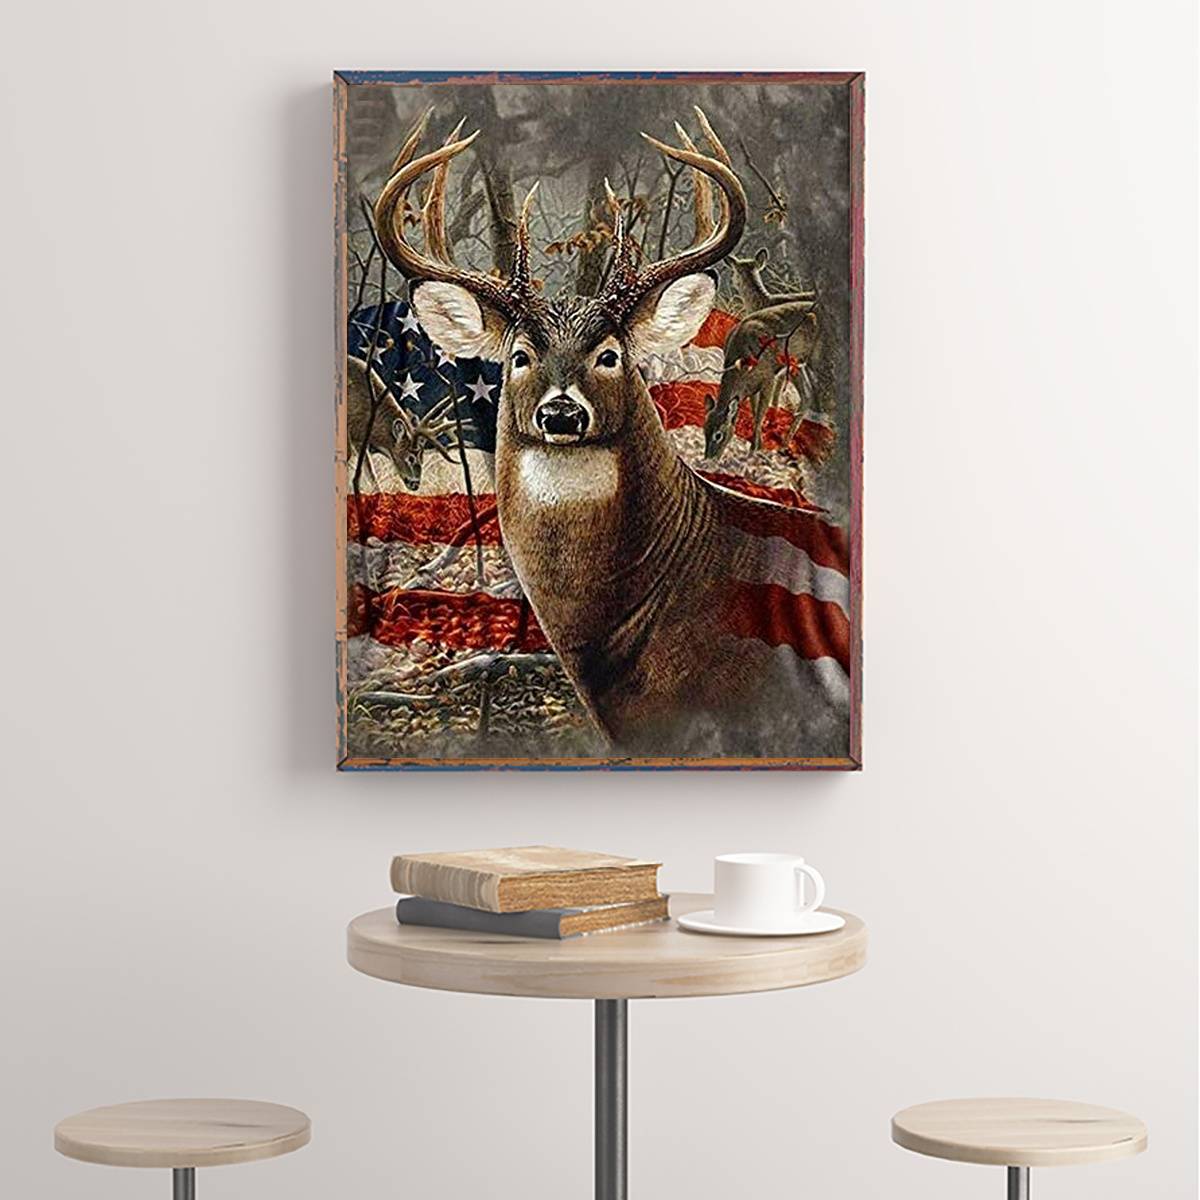 Mimik Deer Diamond Painting,Paint by Diamonds for Adults, Diamond Art with  Accessories & Tools,Wall Decoration Crafts,Relaxation and Home Wall Decor